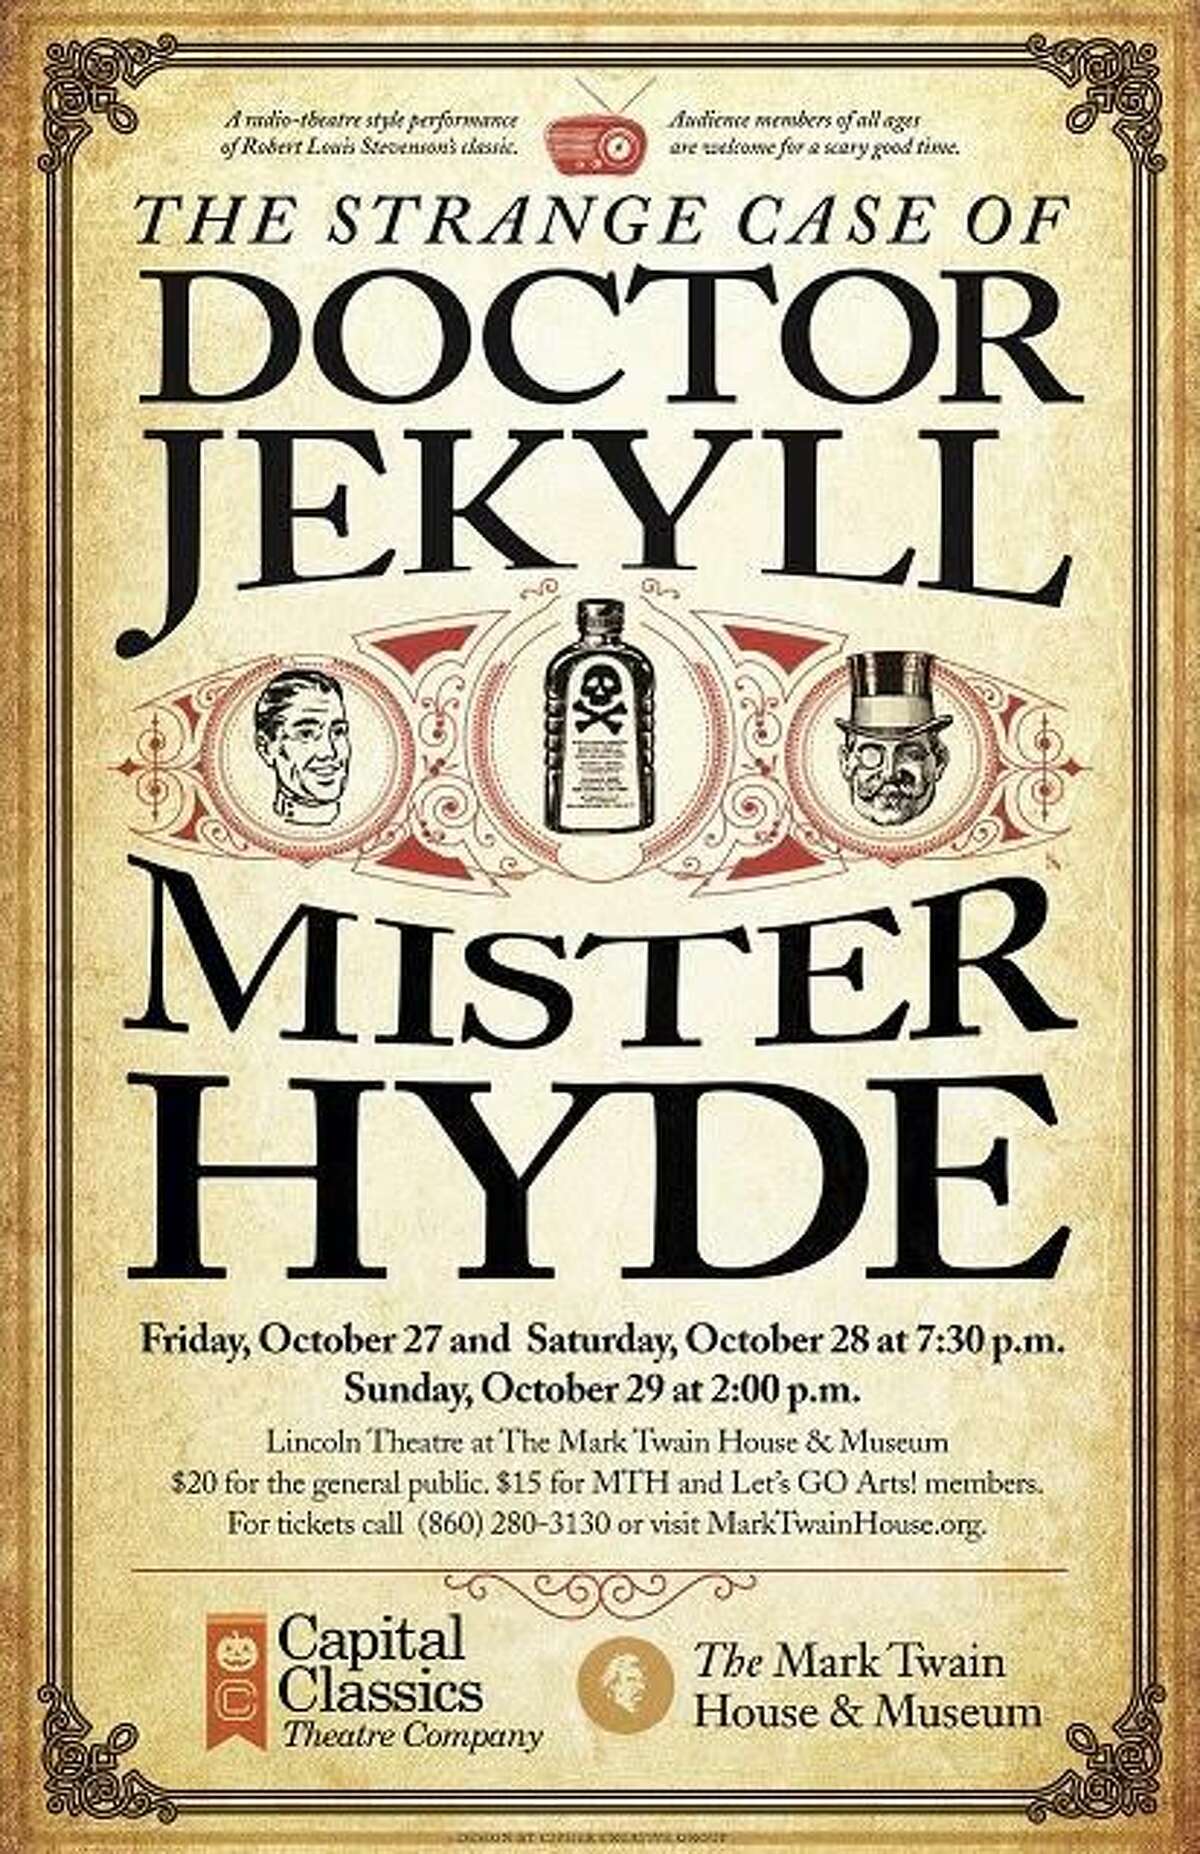 Capital Classics brings "The Strange Case of Doctor Jekyll and Mister Hyde" to The Mark Twain House & Museum.